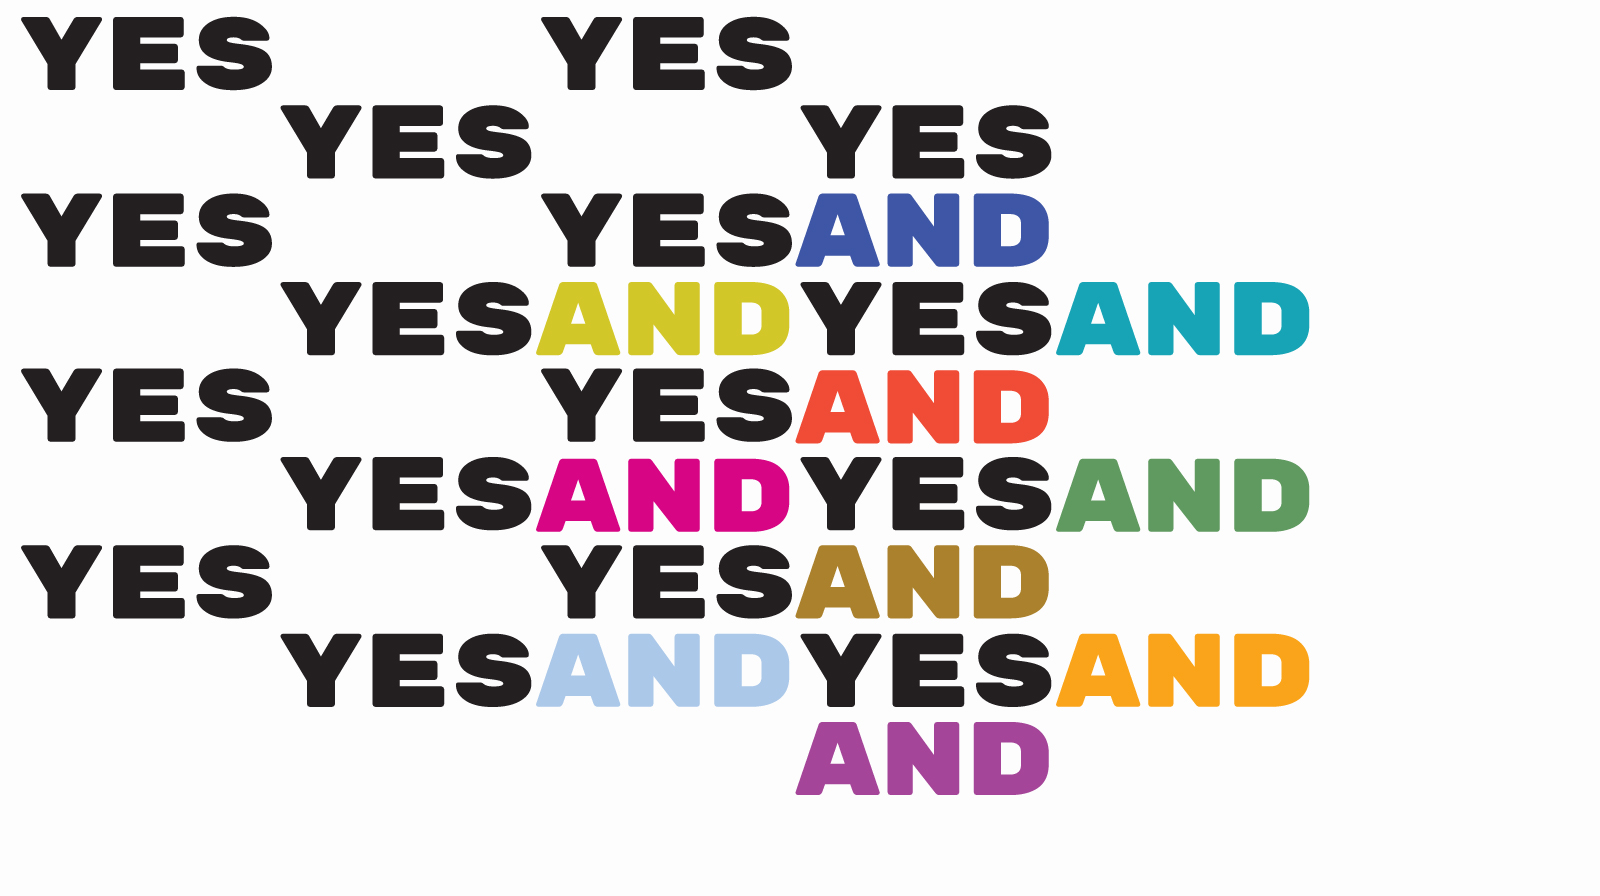 The words Yes, And in a repeating pattern